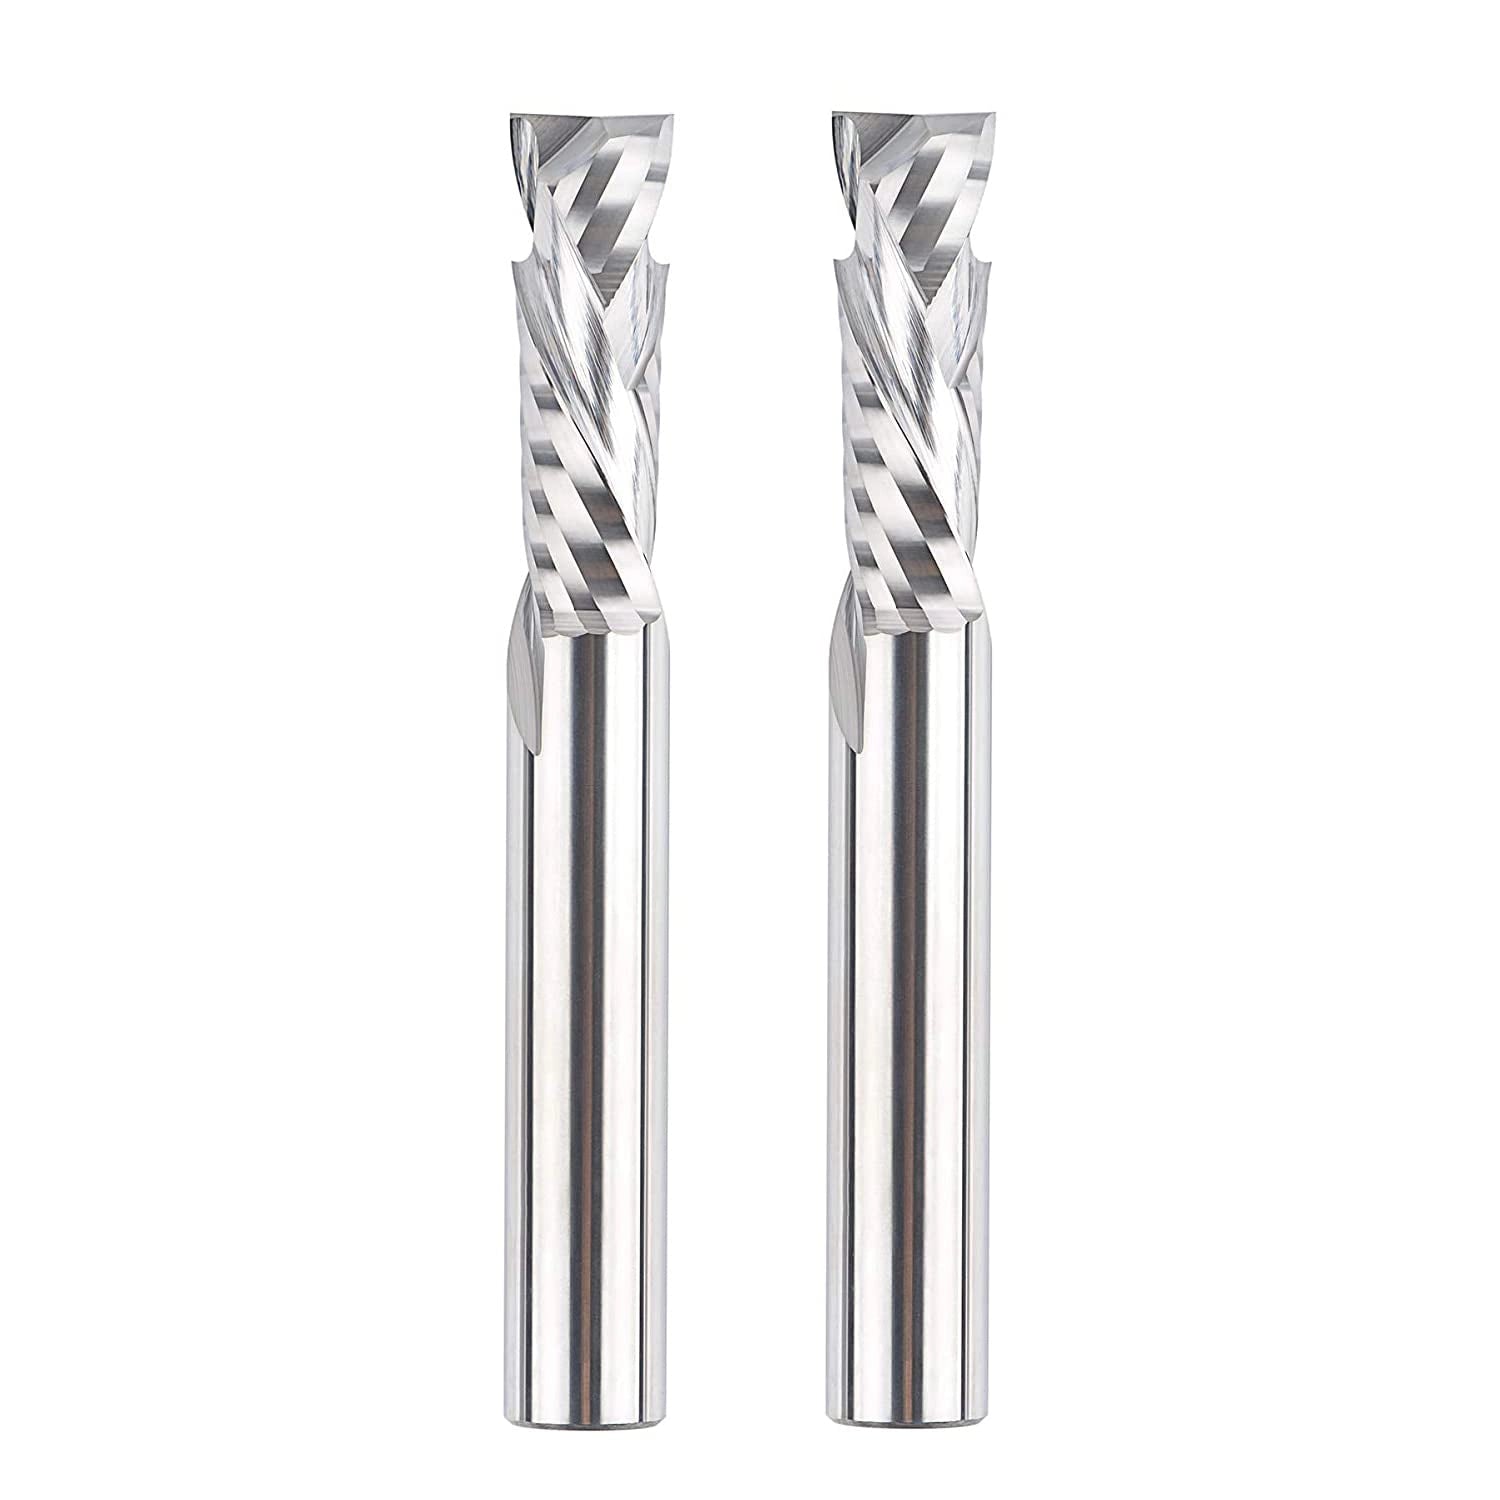 SpeTool W02006 SC Compression Spiral 1/2" Dia x 1/2" Shank x 1-1/2" Cutting Length x 4" Extra Long 2 Flute Router Bit